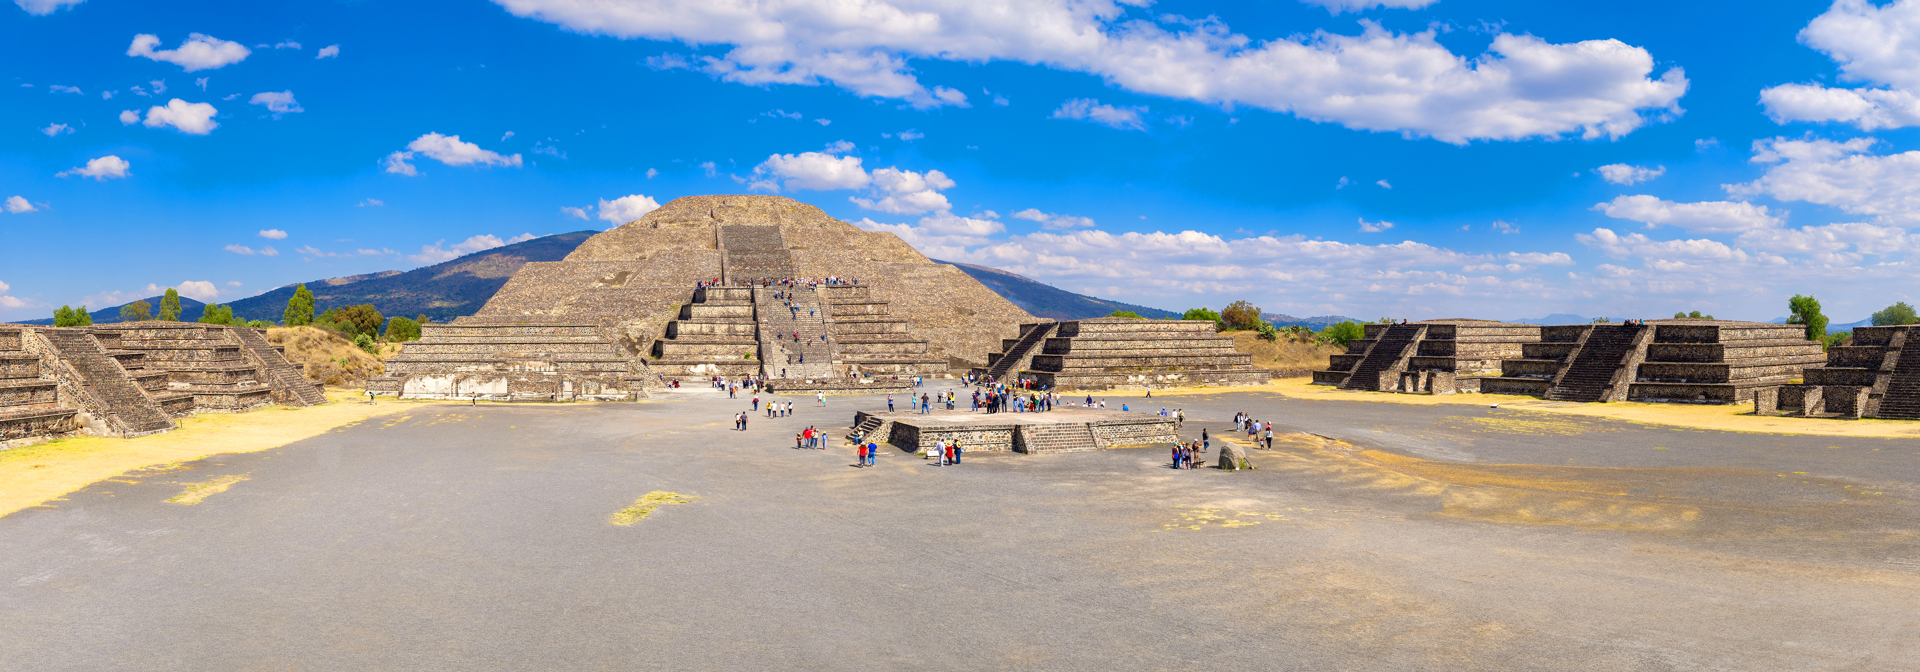 mexico - teotihuacan pyramide_slider_01